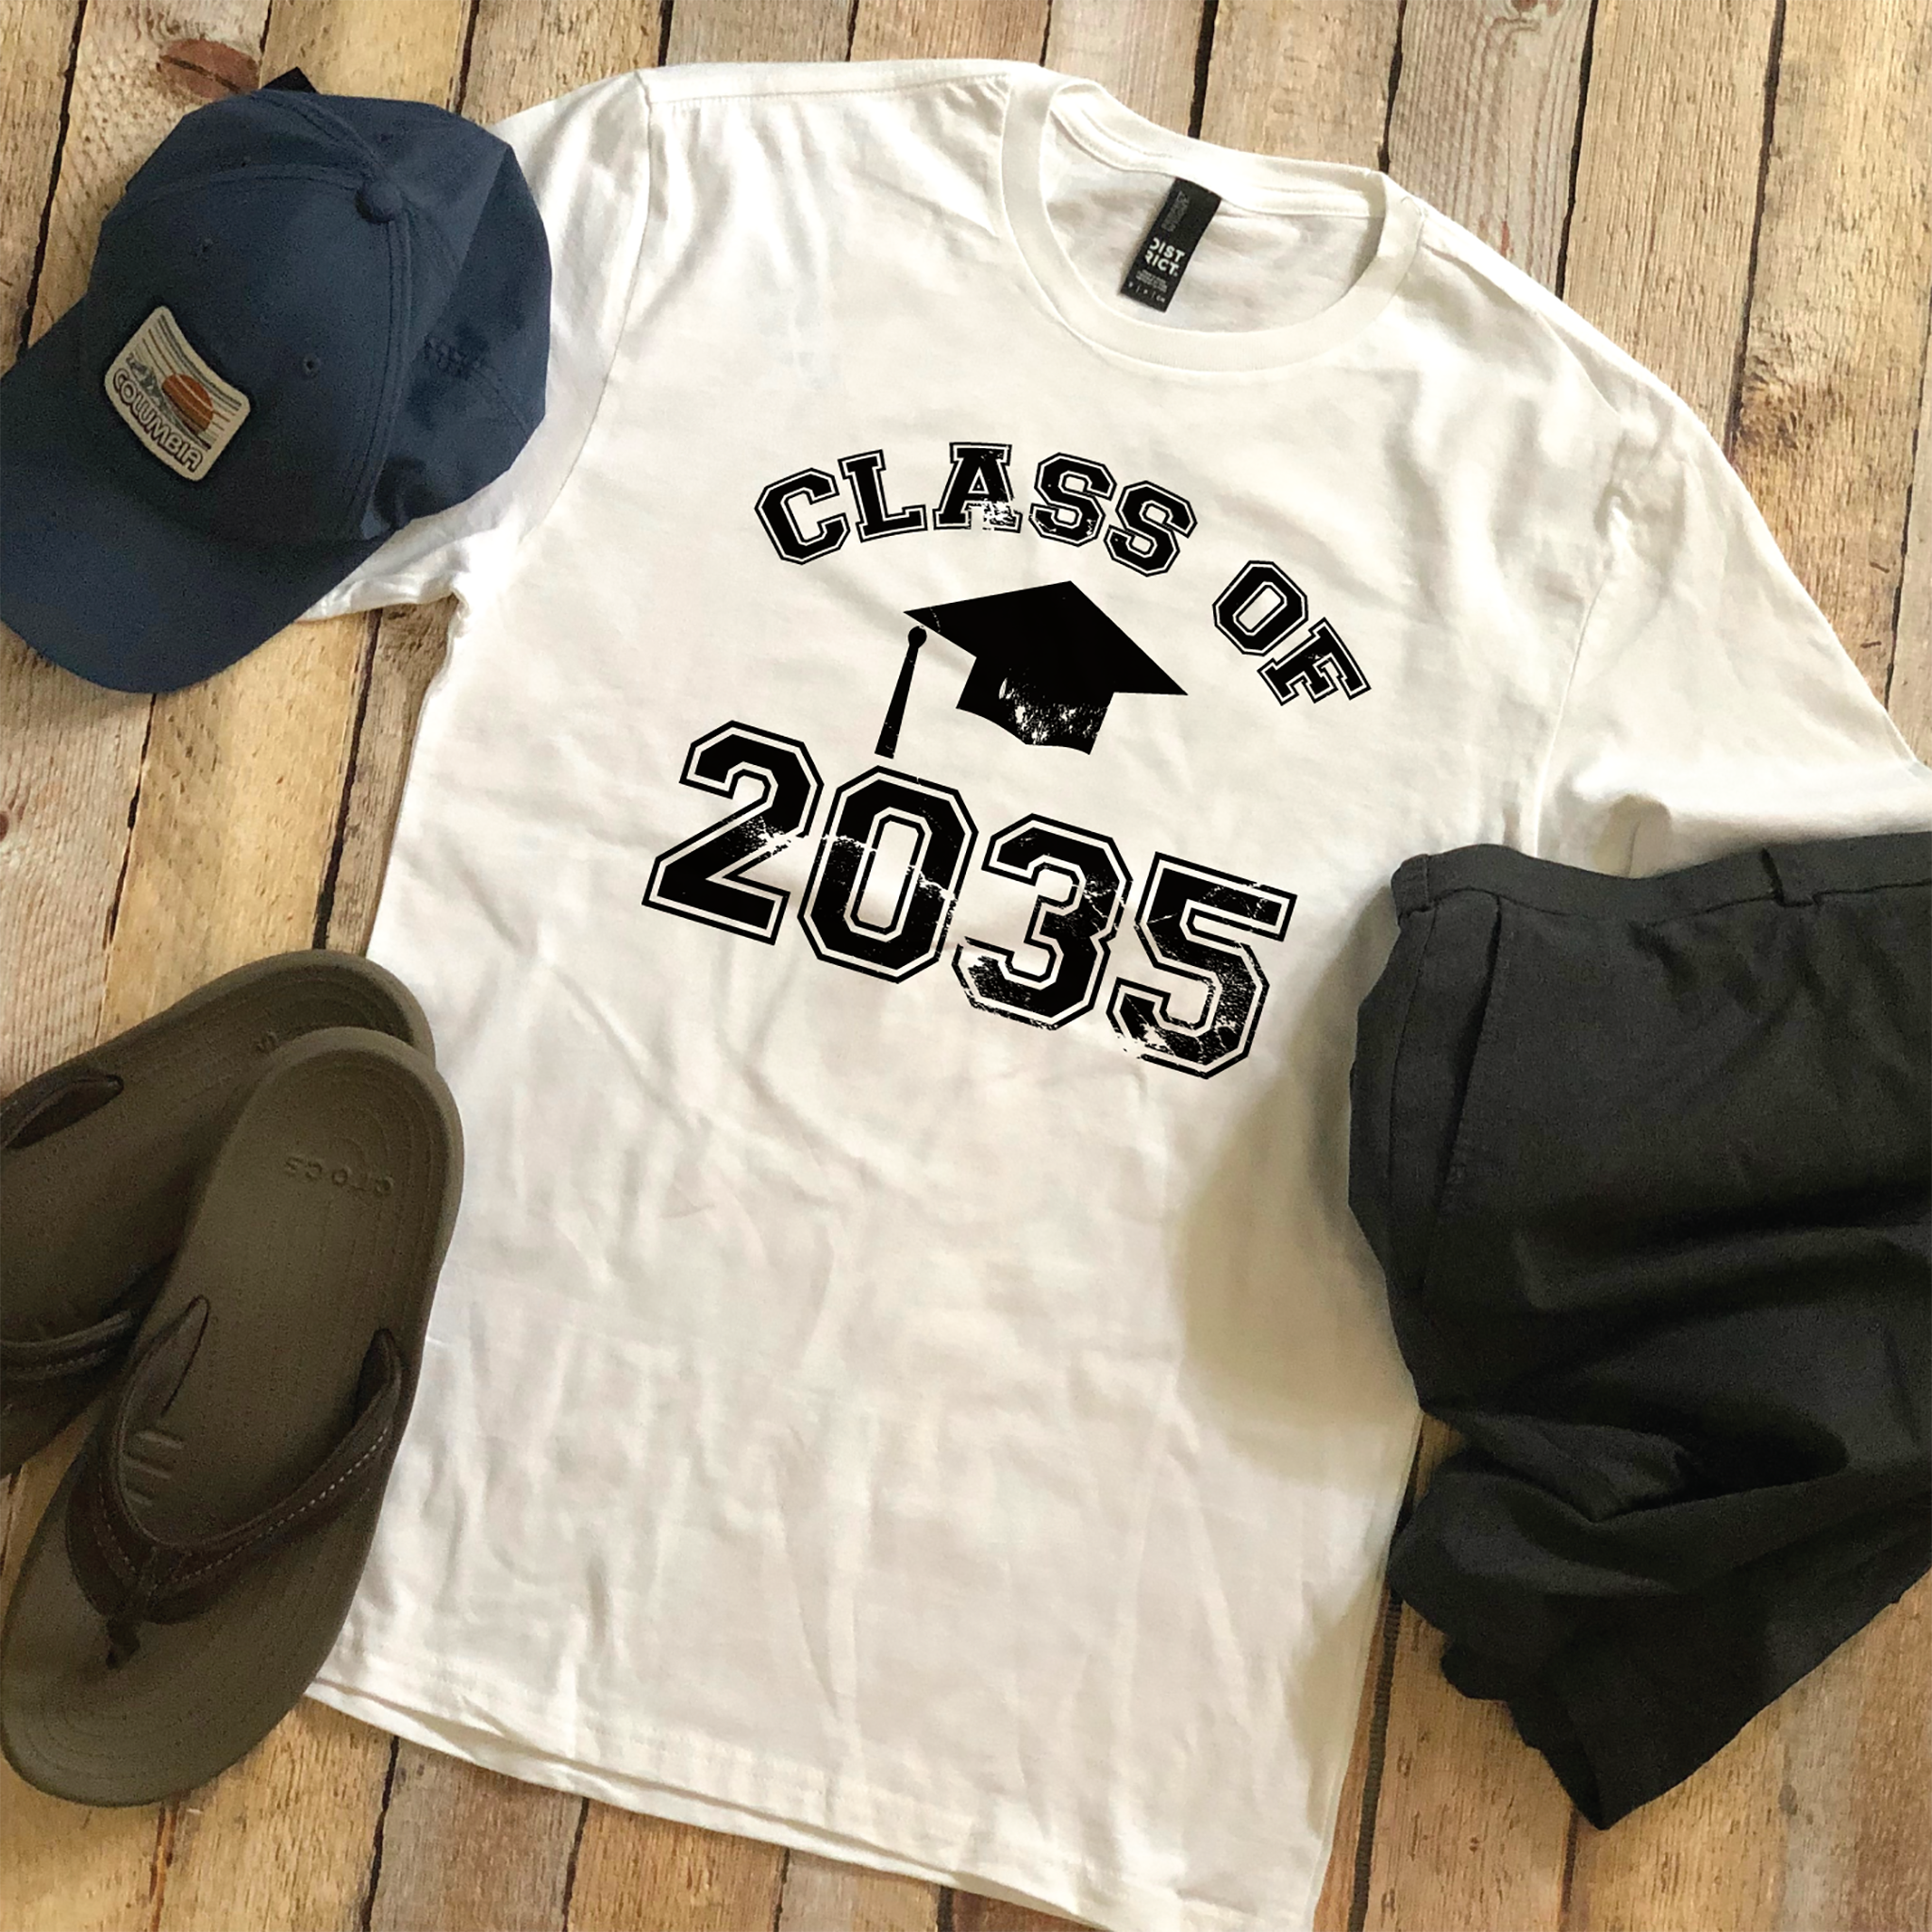 Class Of 2035 Grow With Me Shirt Cap and Tassel, Back to School Shirt, First Day of School Pictures